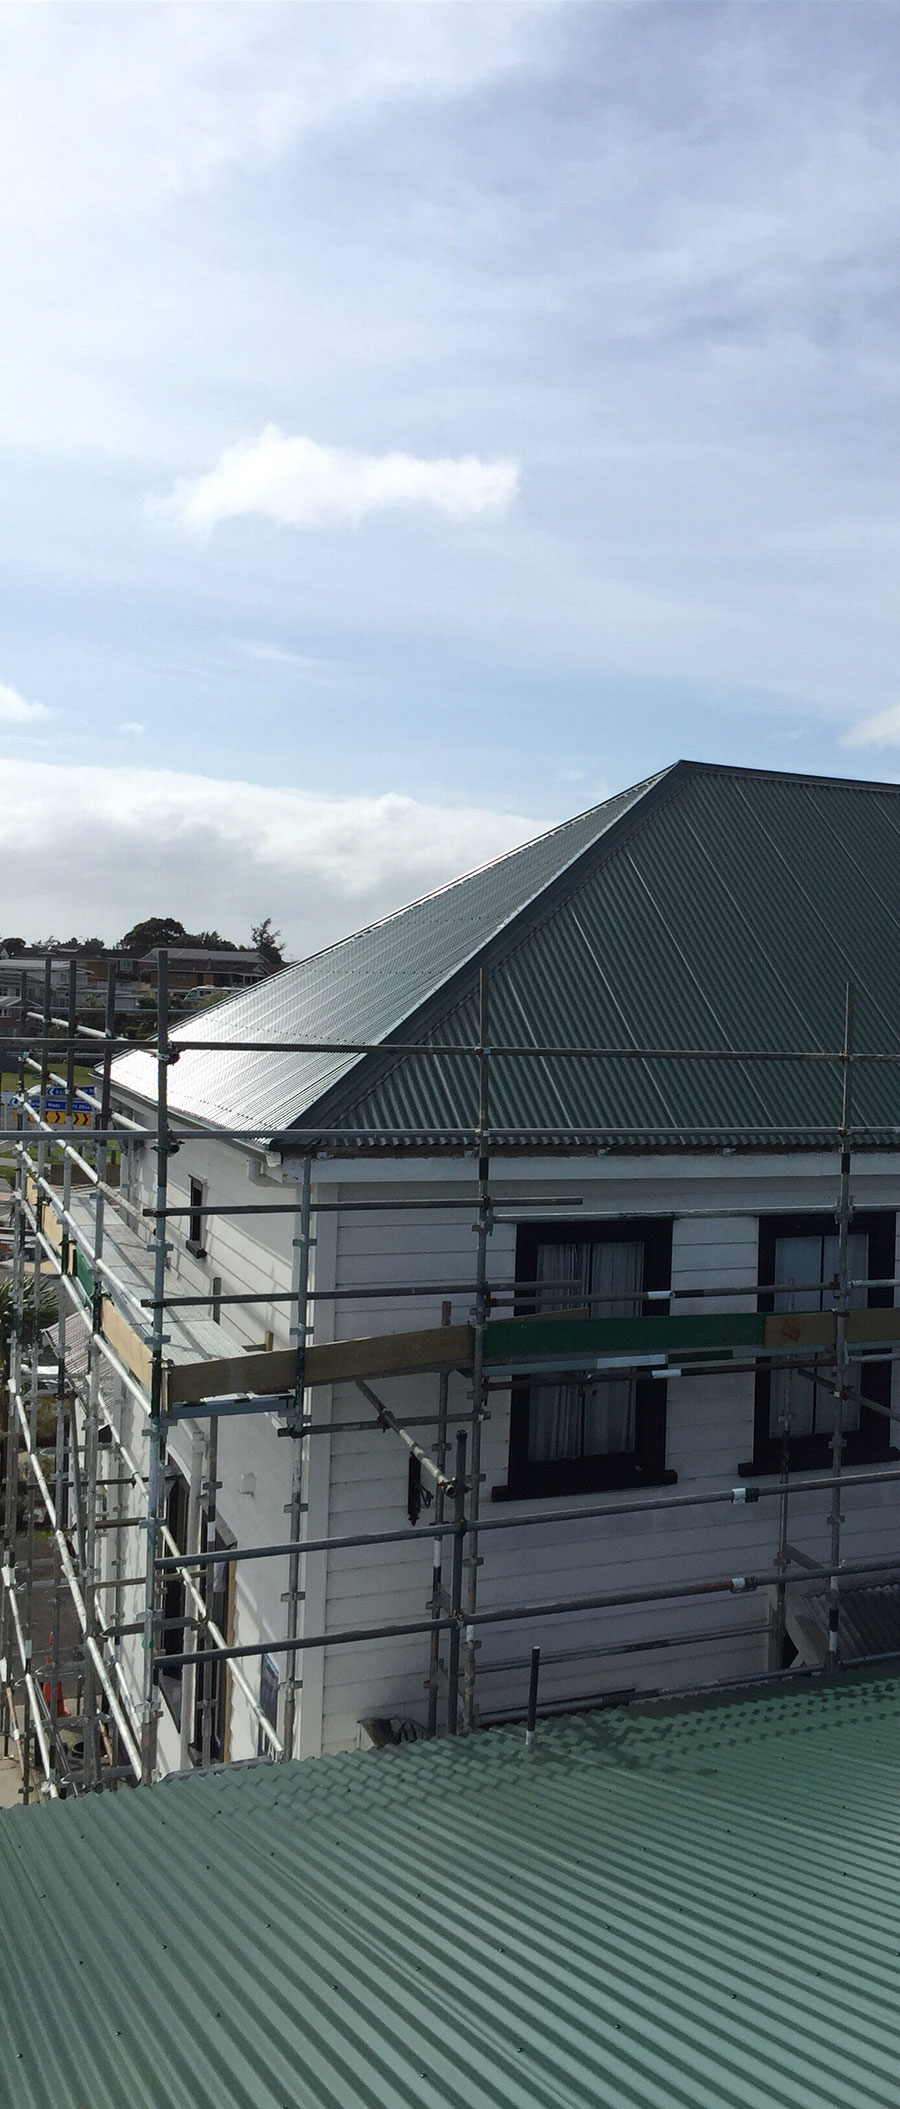 auckland roofing solutions services auckland and new zealand wide new roofs repair cladding and more Project gallery 57